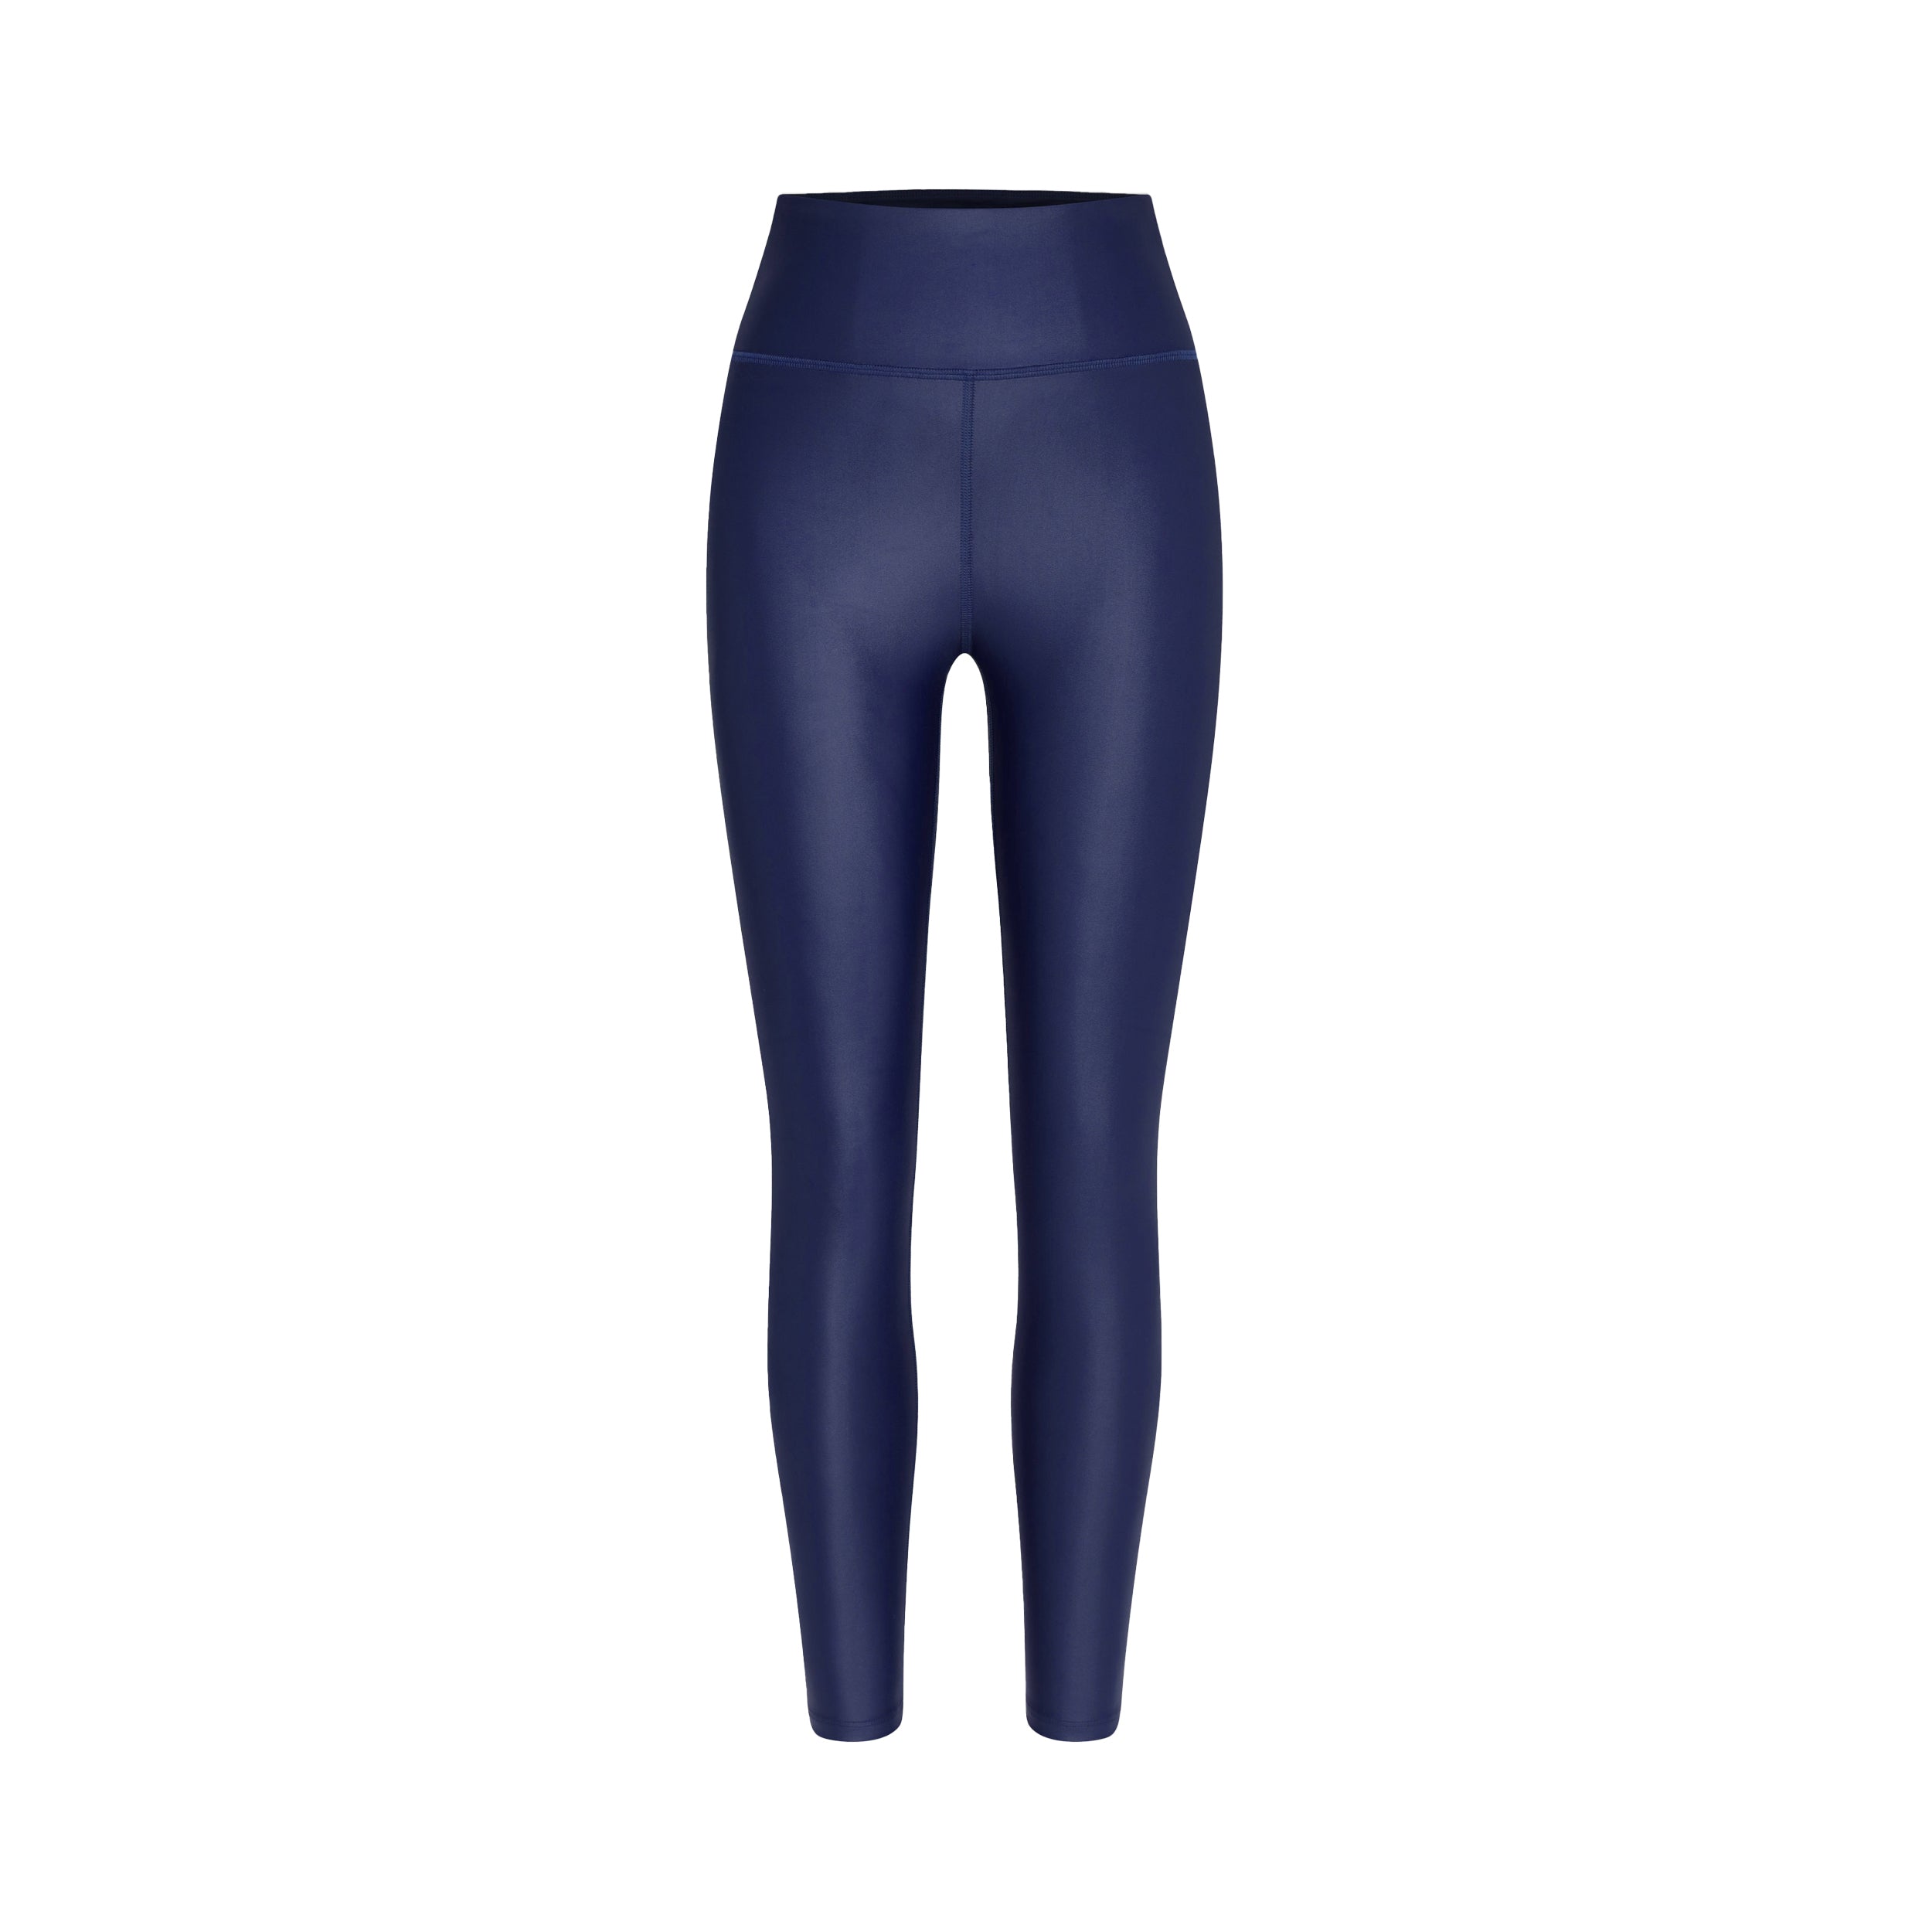 Product view of woman wearing lightweight, lustrous shine, quick drying navy blue liquid leggings